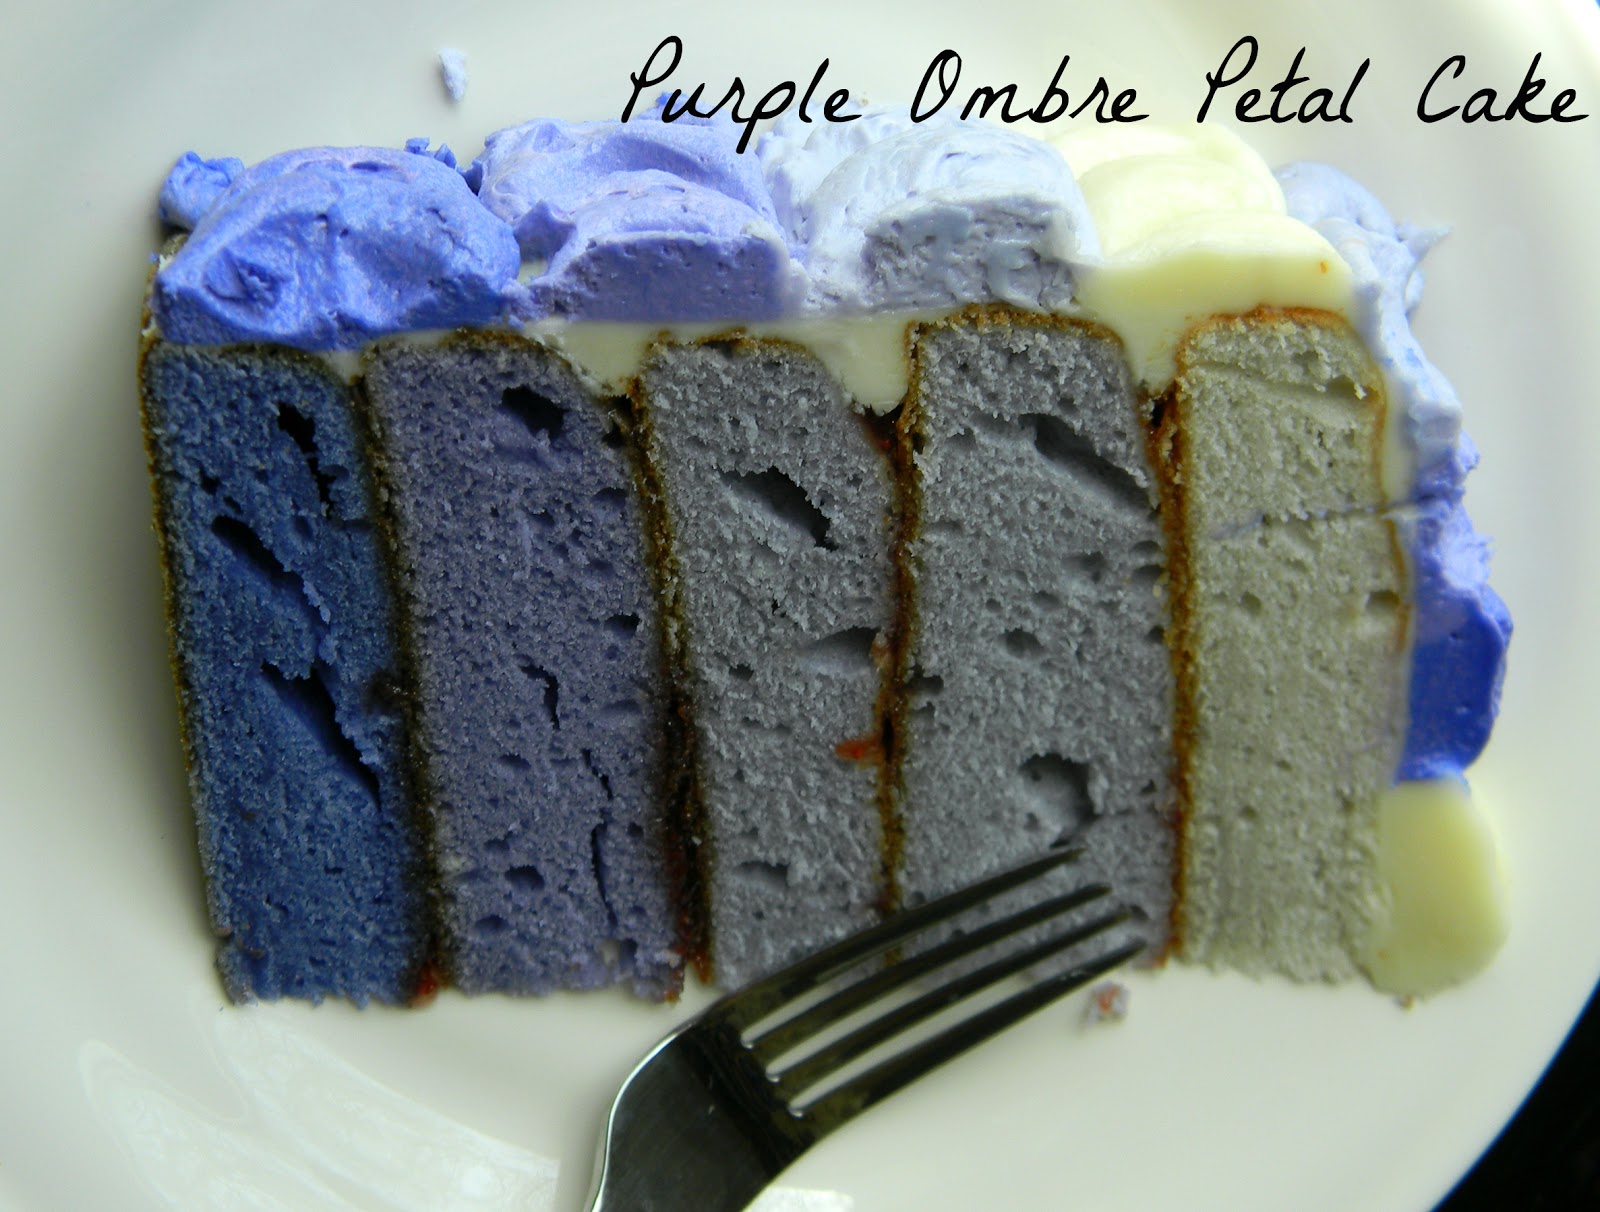 freaked out 'n small: Purple Ombre Petal Cake1600 x 1212